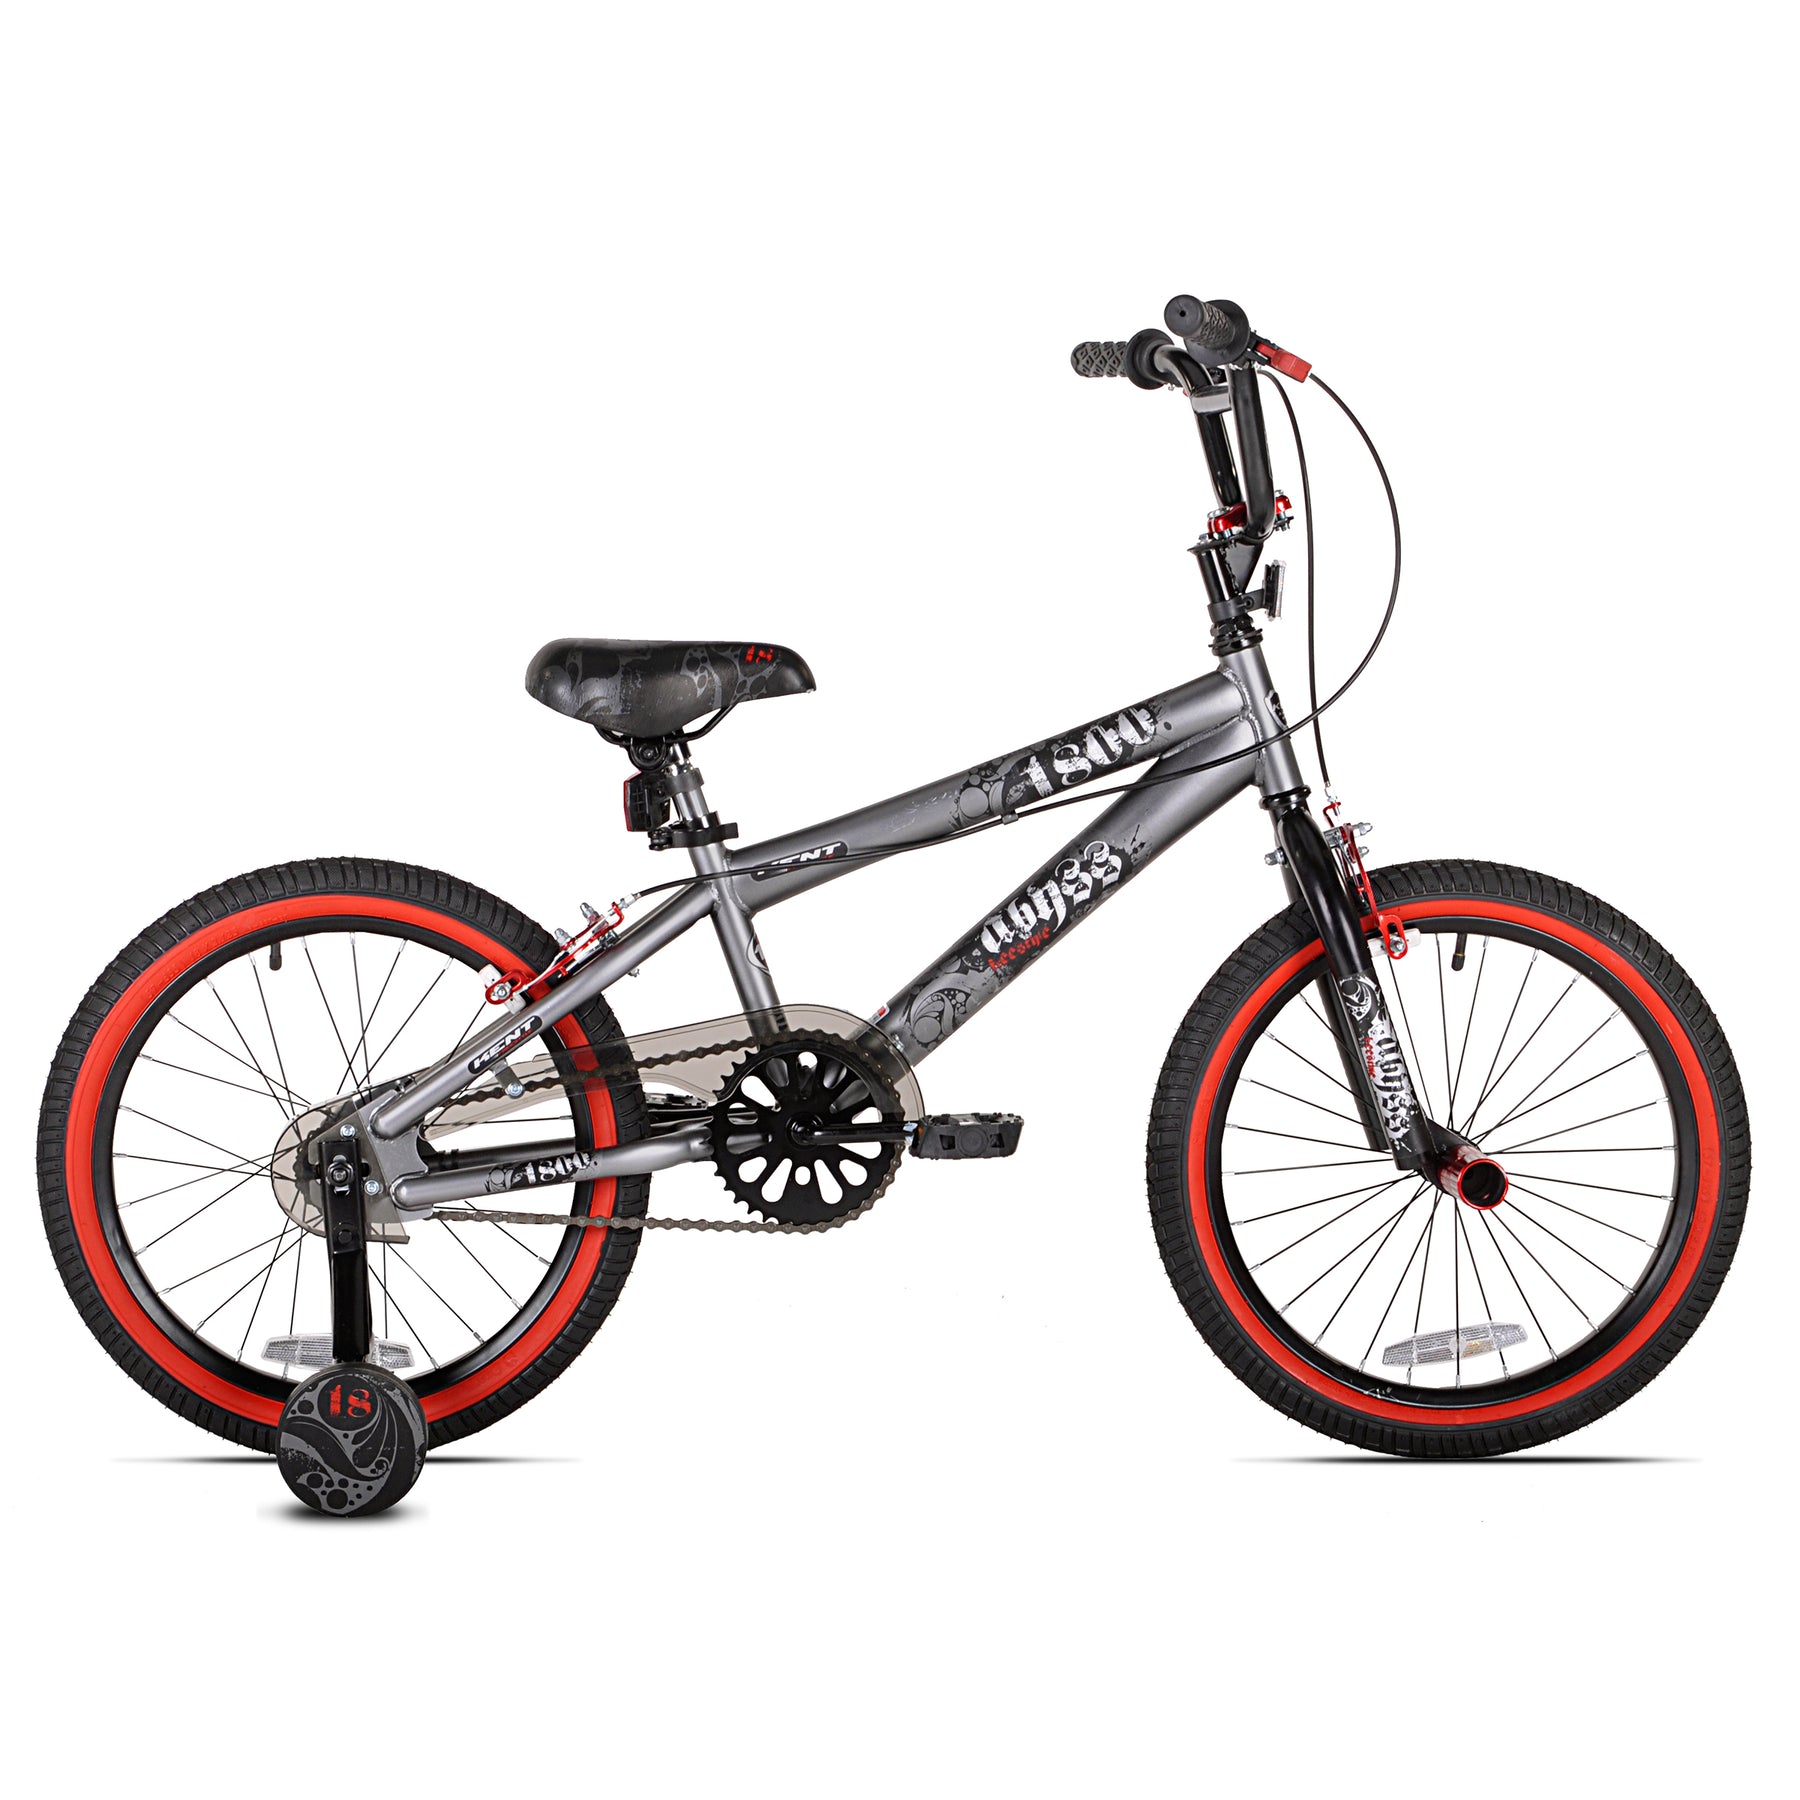 18" Kent Abyss | BMX Bike for Kids Ages 5-8